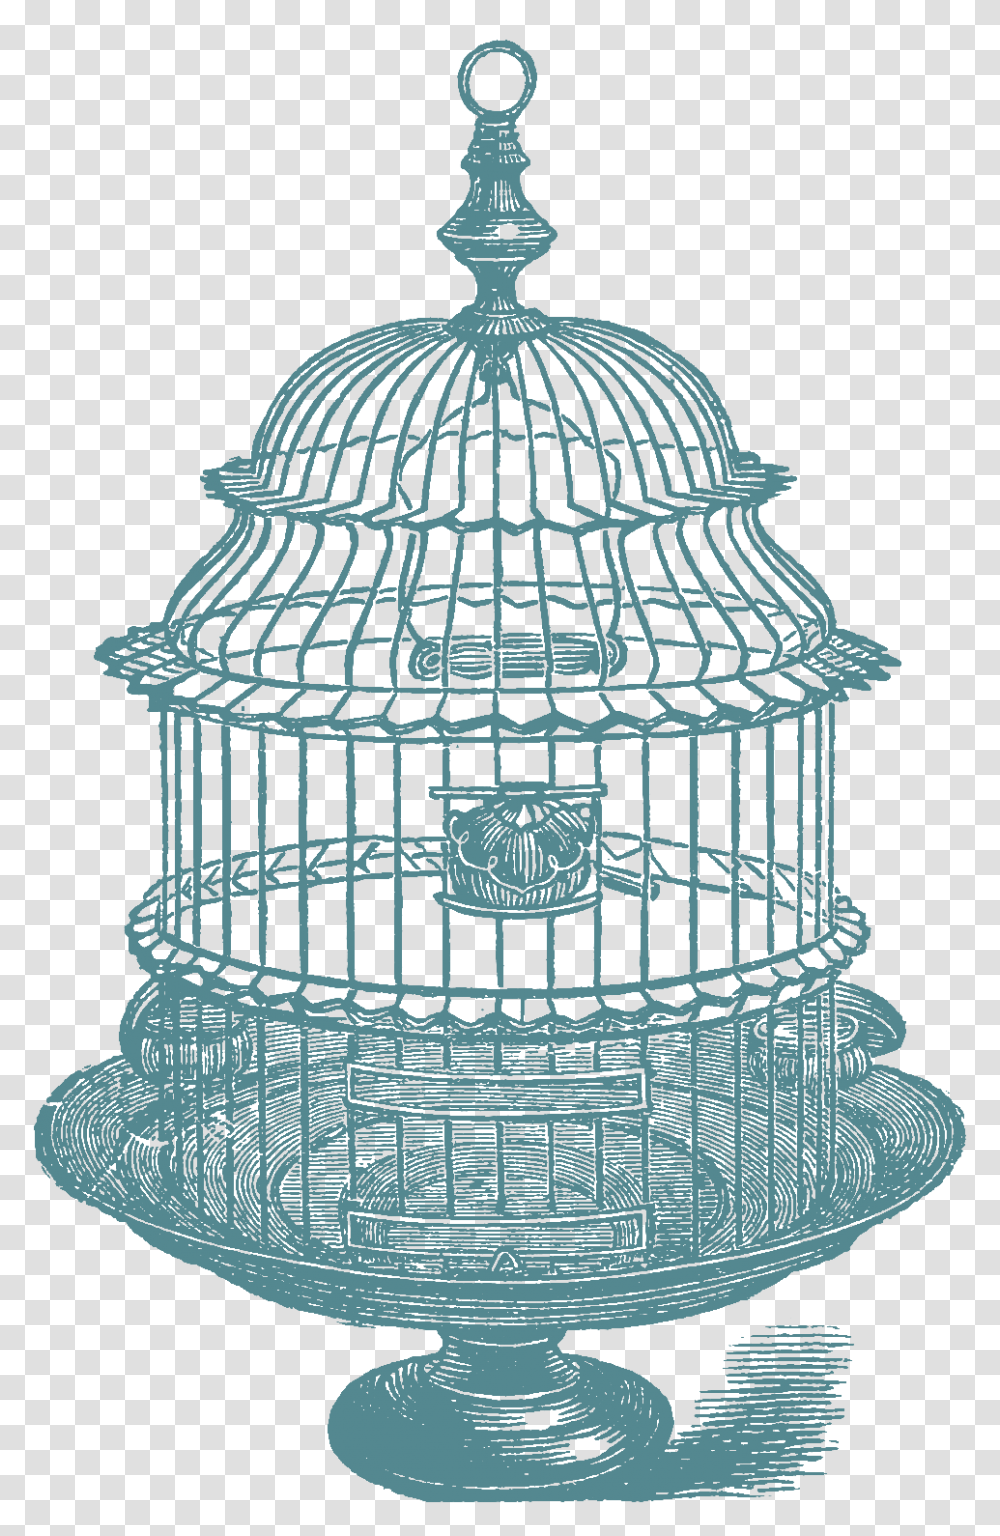 Another Set Of Bird Cage Stock Images Oh So Nifty Vintage Graphics, Pattern, Bird Feeder Transparent Png